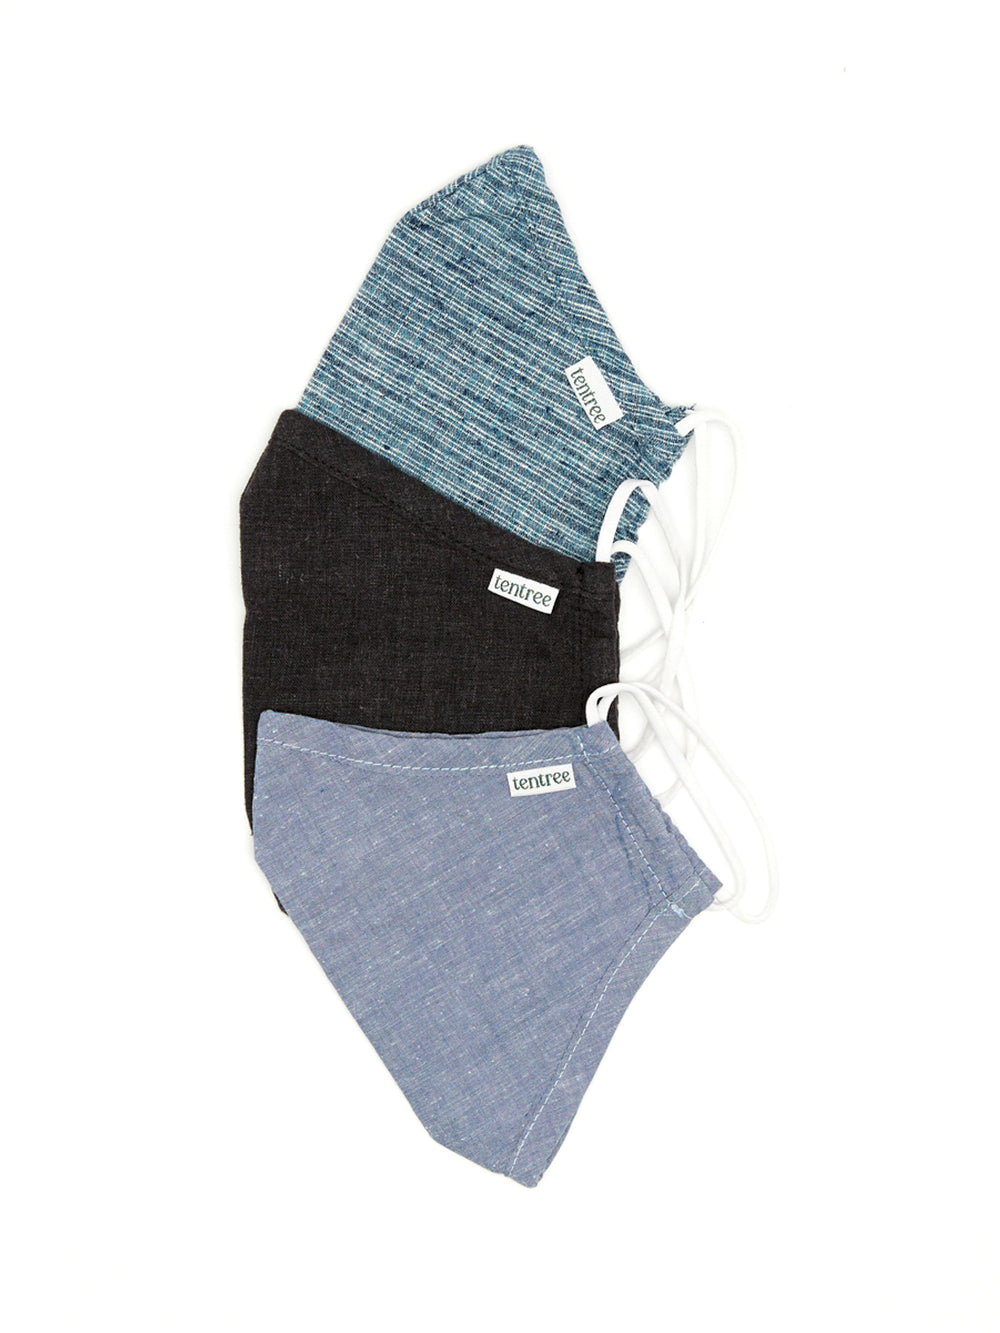 TENTREE THE PROTECT MASK 3 PACK - MULTI - CLEARANCE